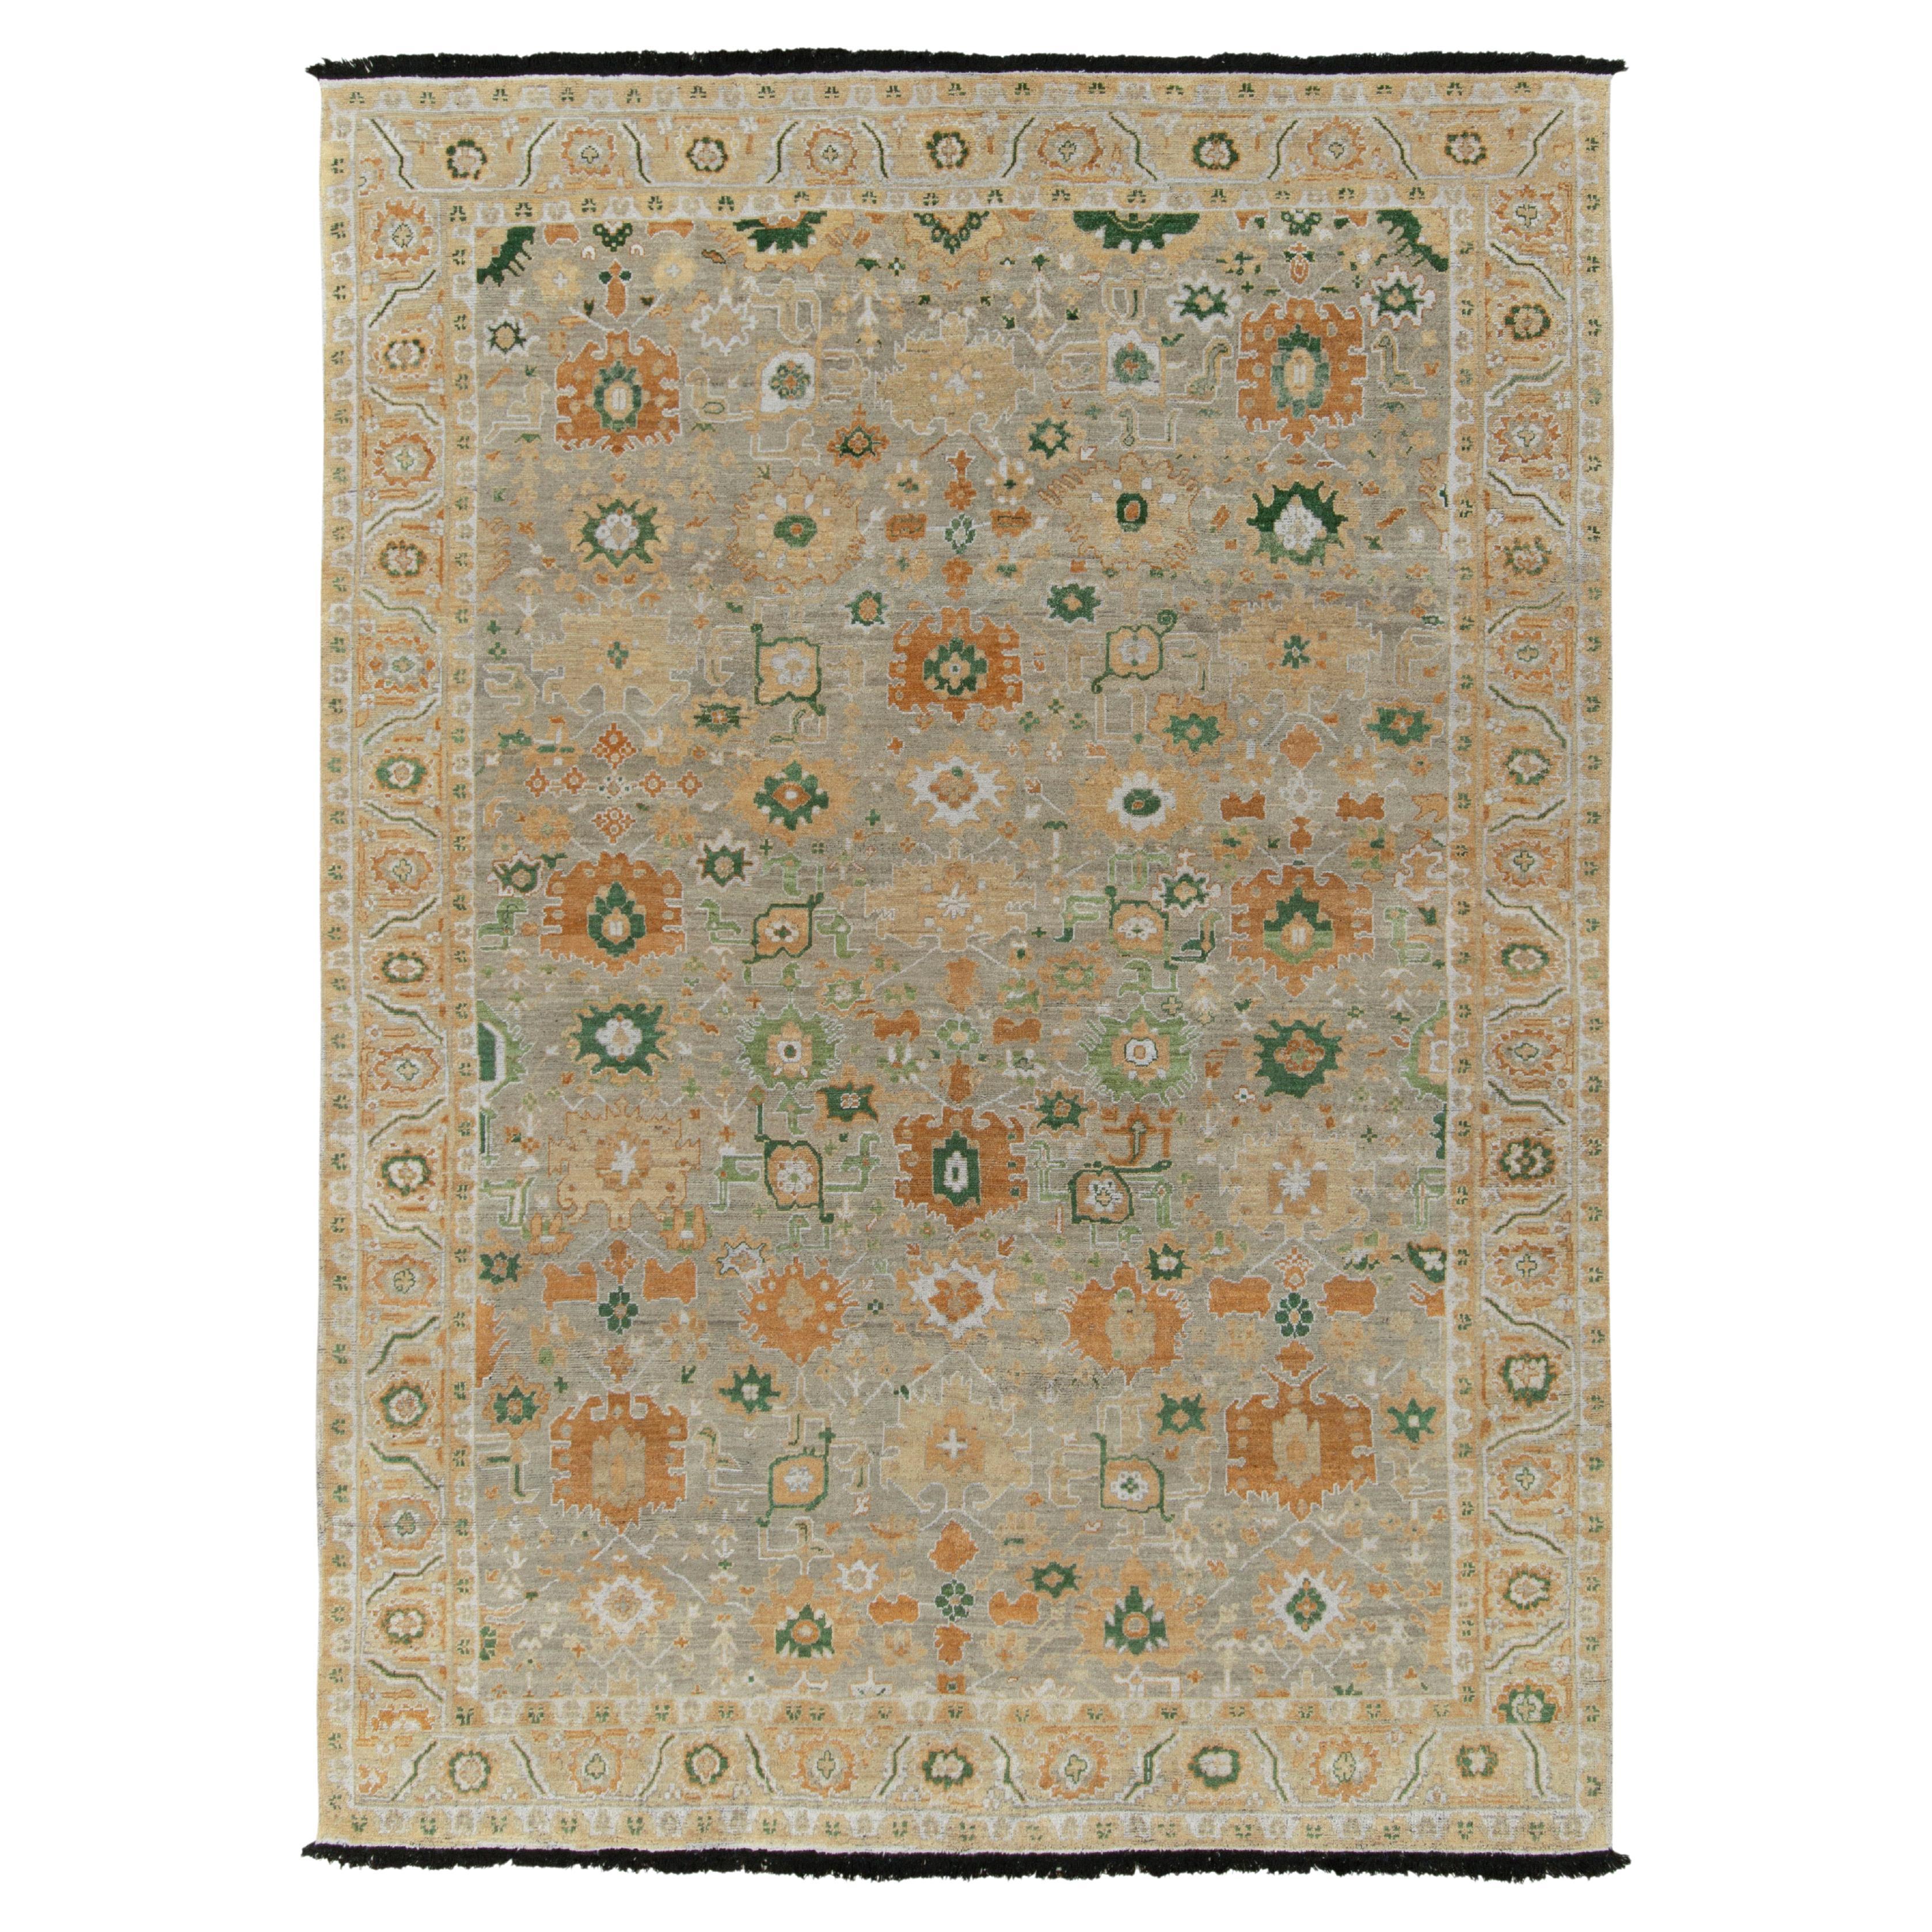 Rug & Kilim's Antique Oushak Style Rug in Grey, Green and Gold Floral Pattern